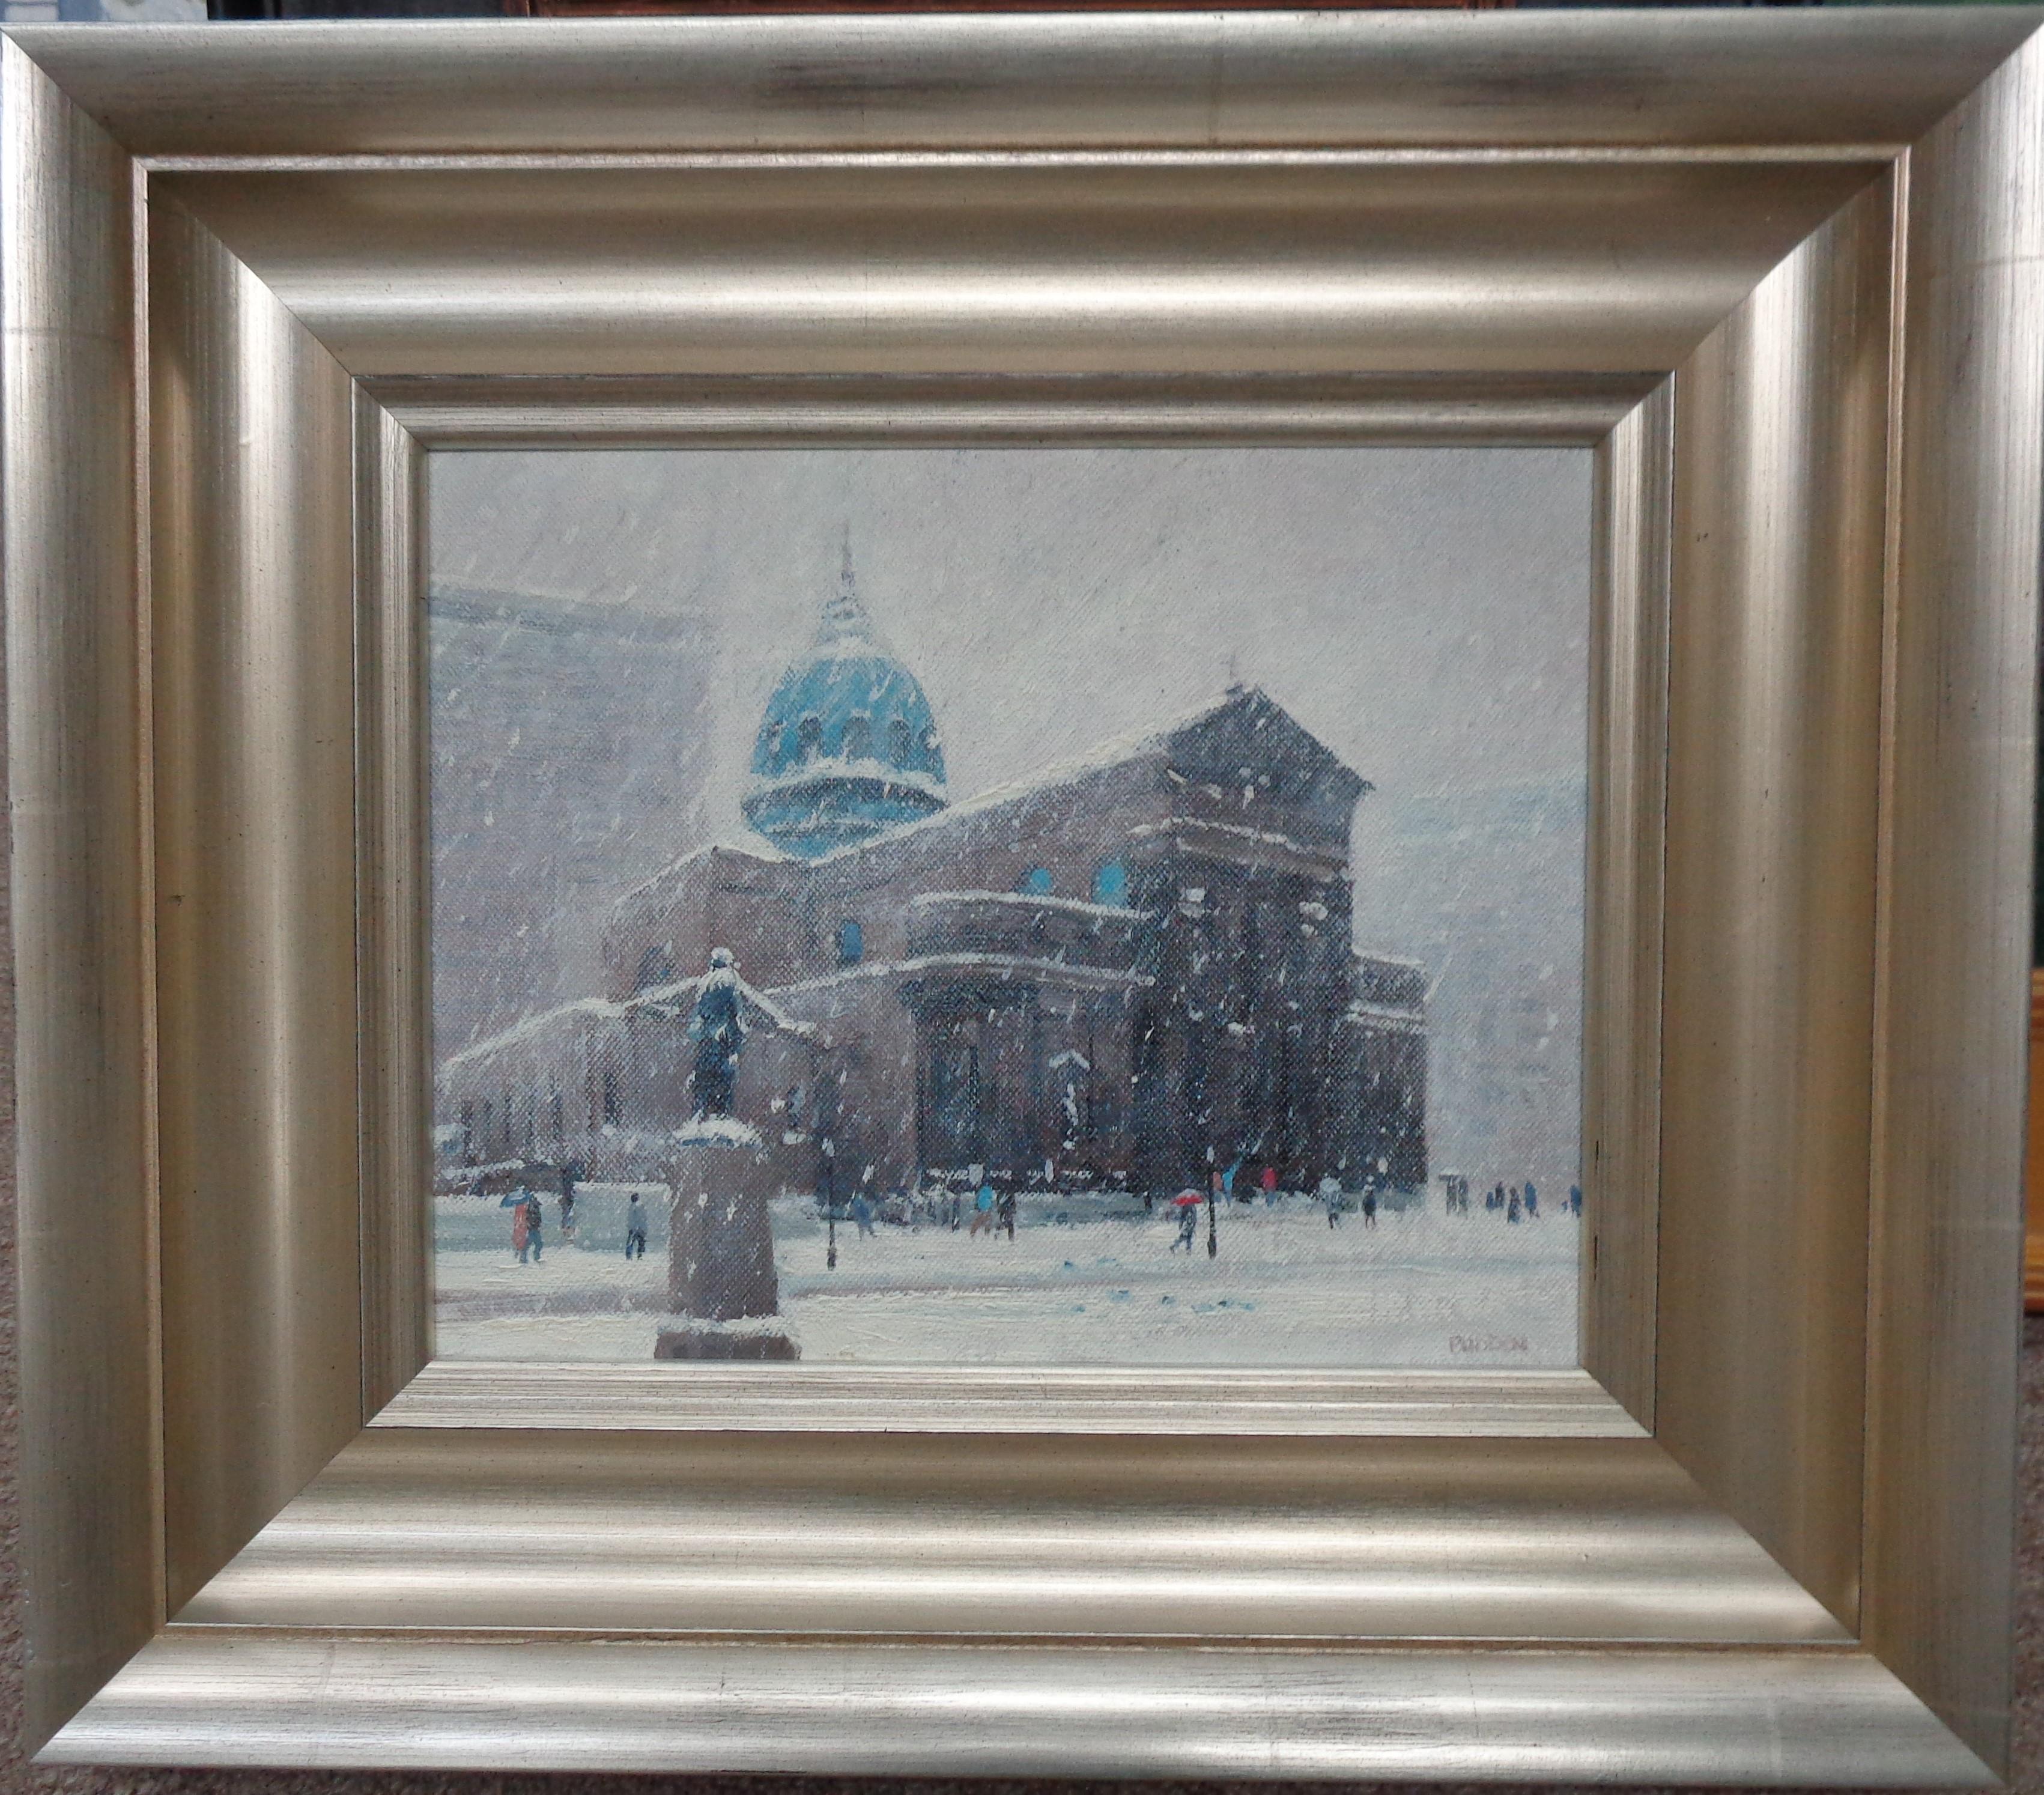  Saints Peter & Paul Cathedral Philadelphia PA
oil/canvas panel
8 x 10 image


SELLERS STATEMENT
I have been in the art business as an artist and dealer since the early 80's. Almost 40 years now. I primarily concentrate on my own art. My art is